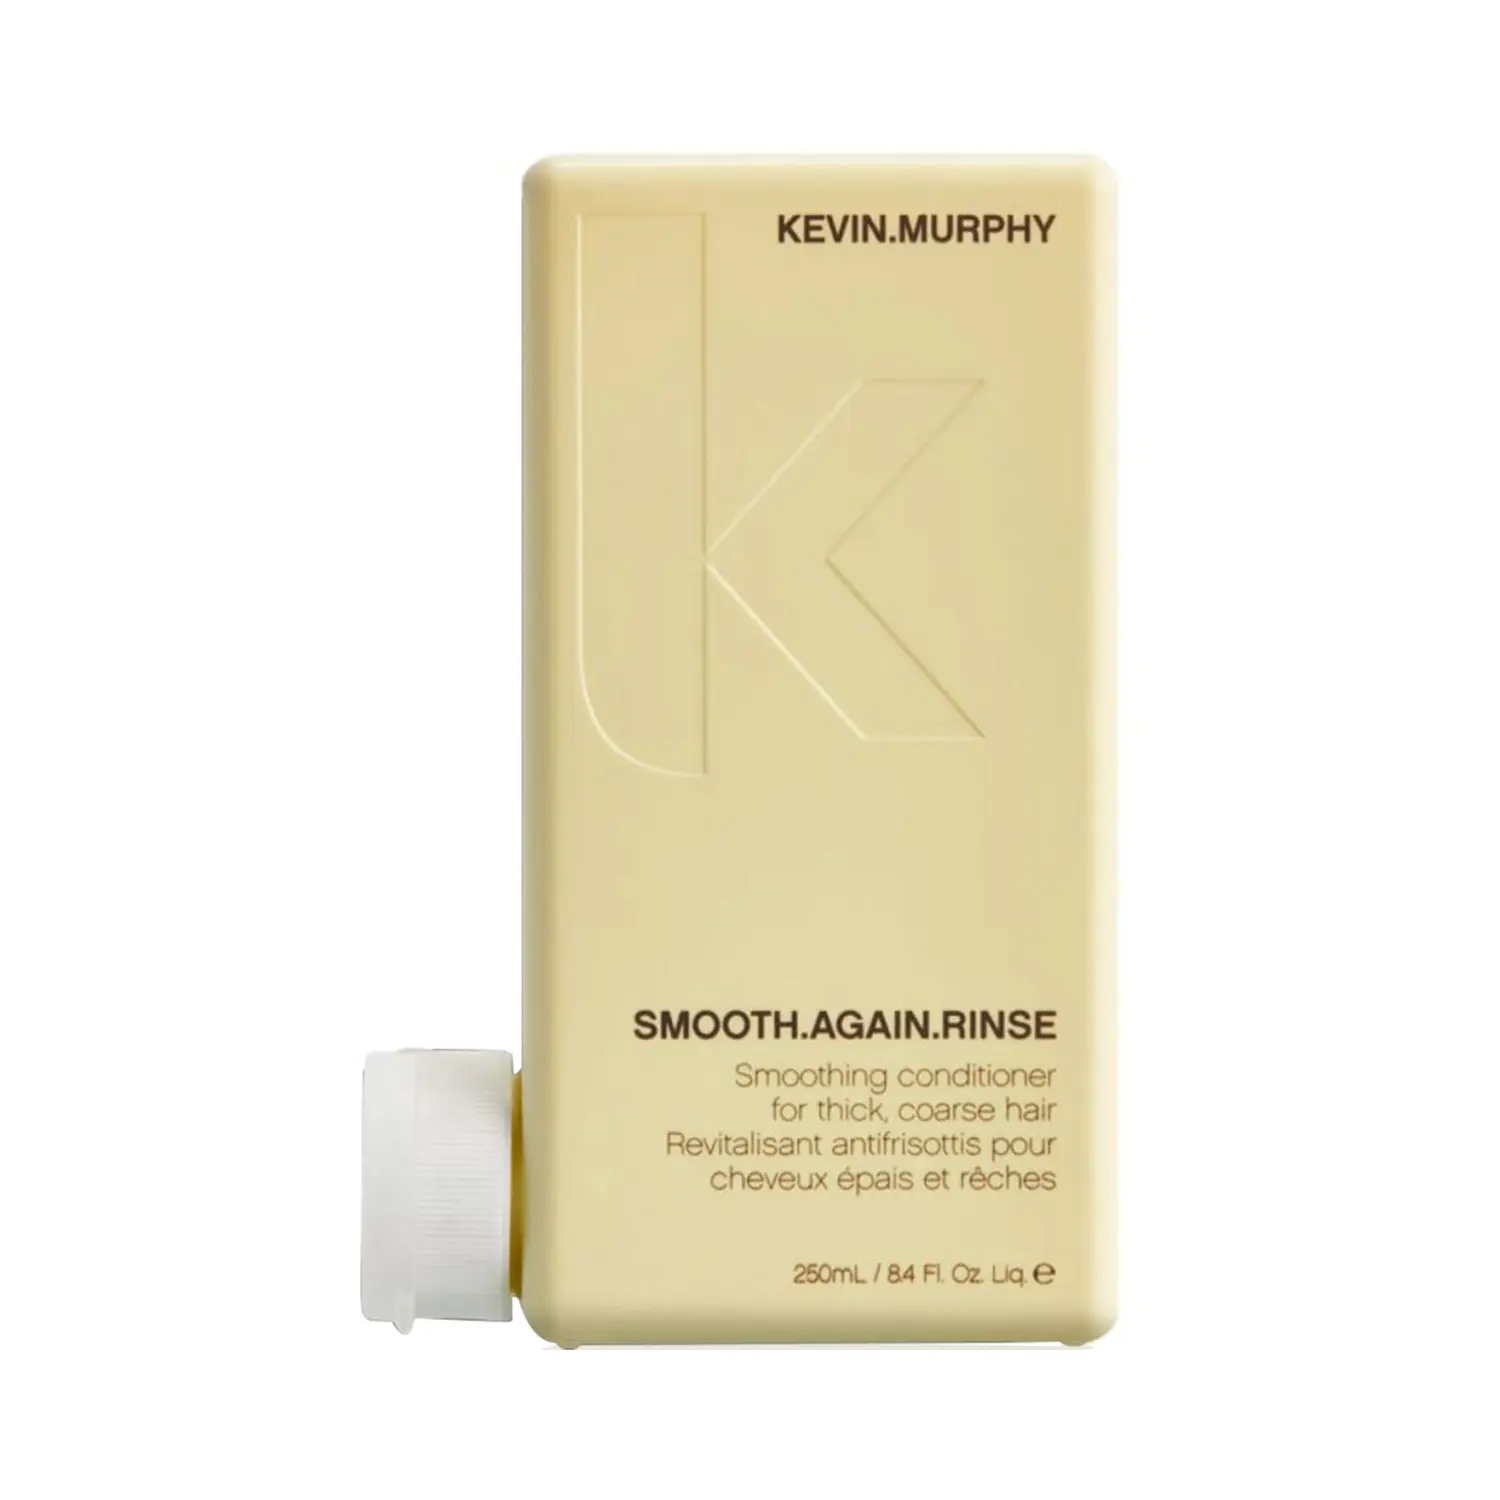 Kevin Murphy | Kevin Murphy Smooth Again Rinse Smoothing Conditioner (250ml)